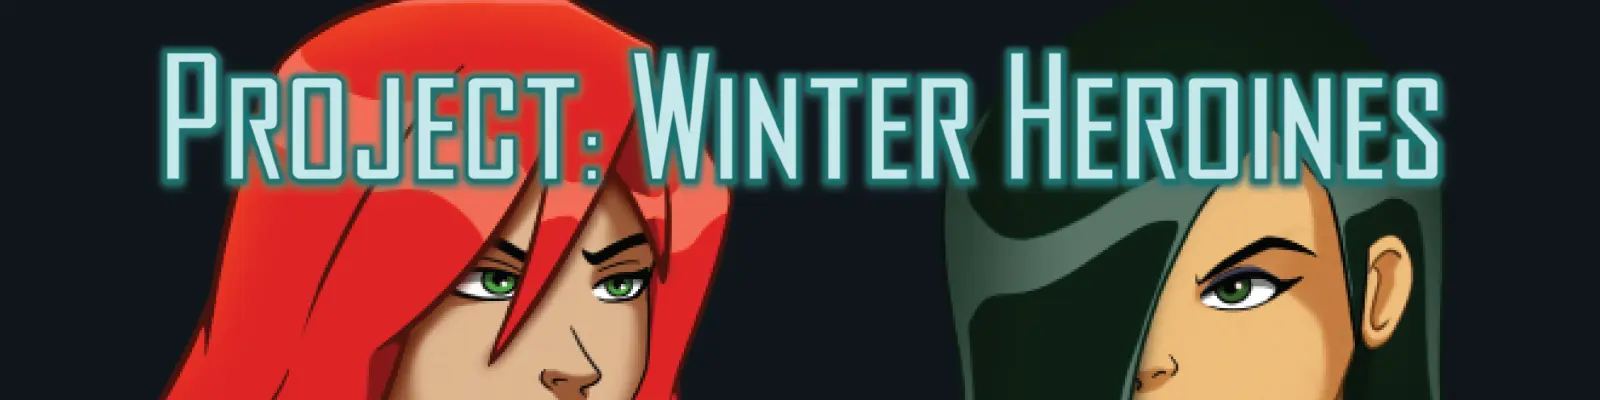 Project Winter Heroines [v1] main image